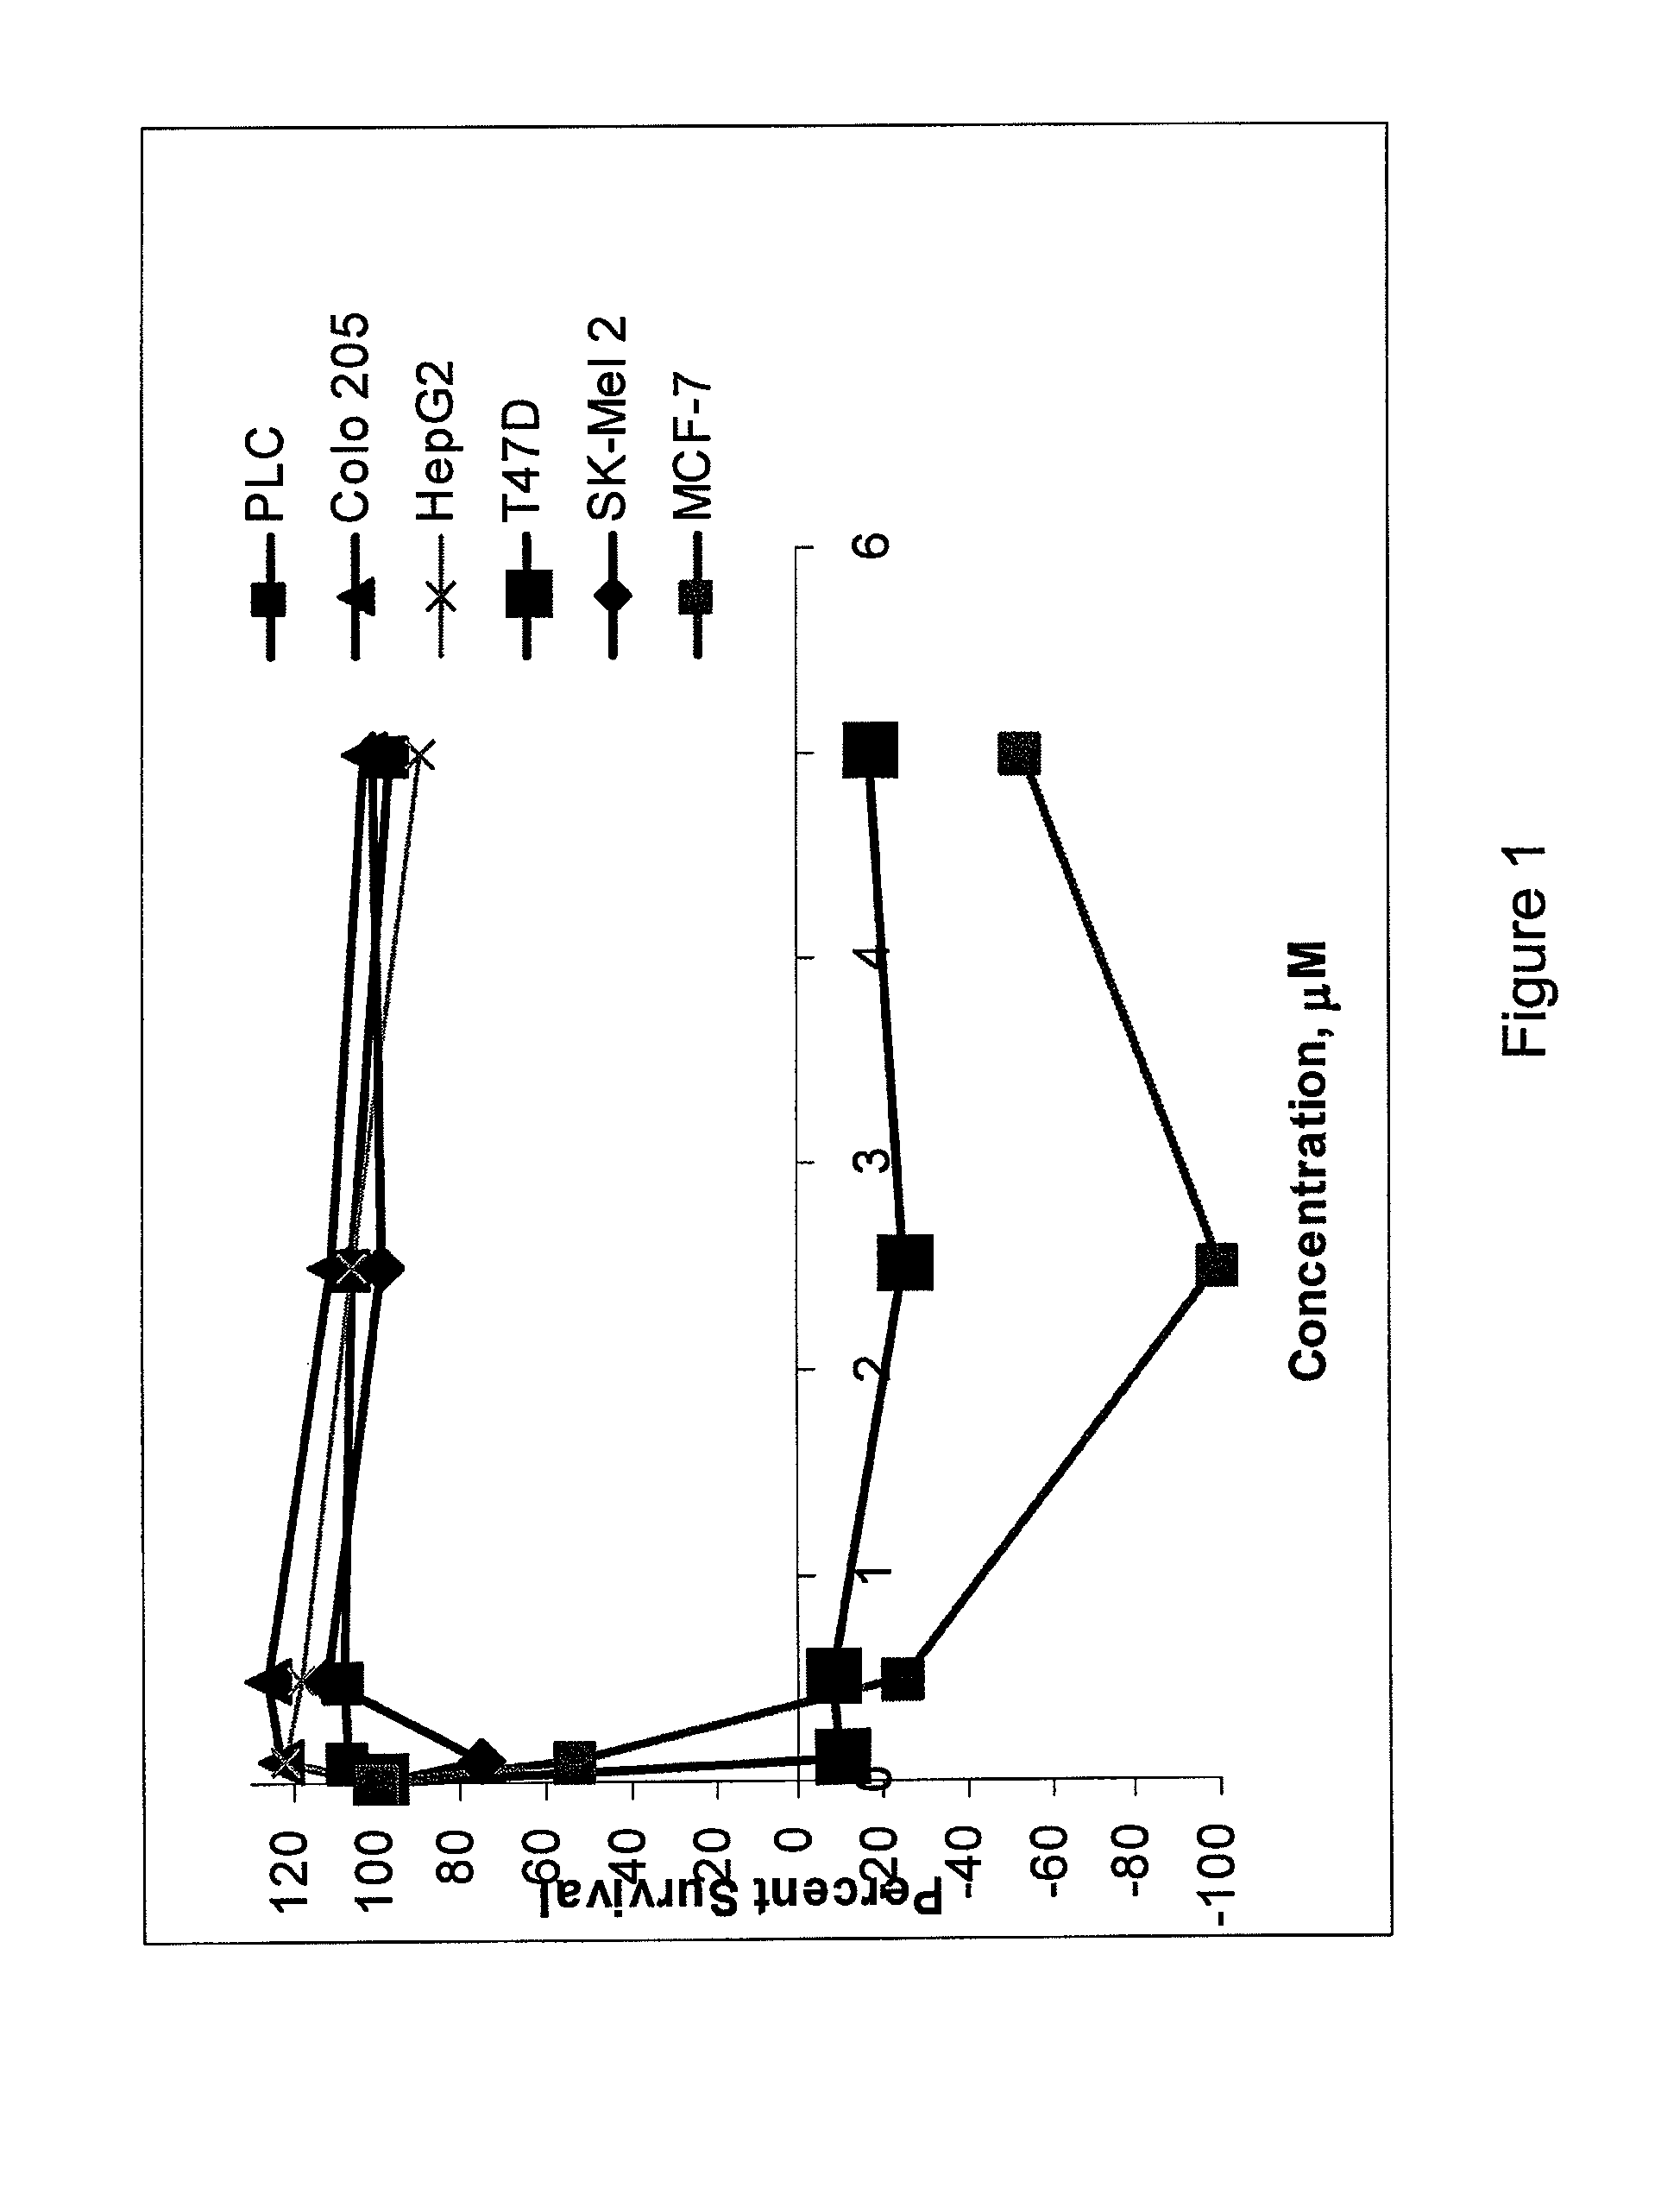 Synthetic analogs of the juxtamembrane domain of igf1r and uses thereof